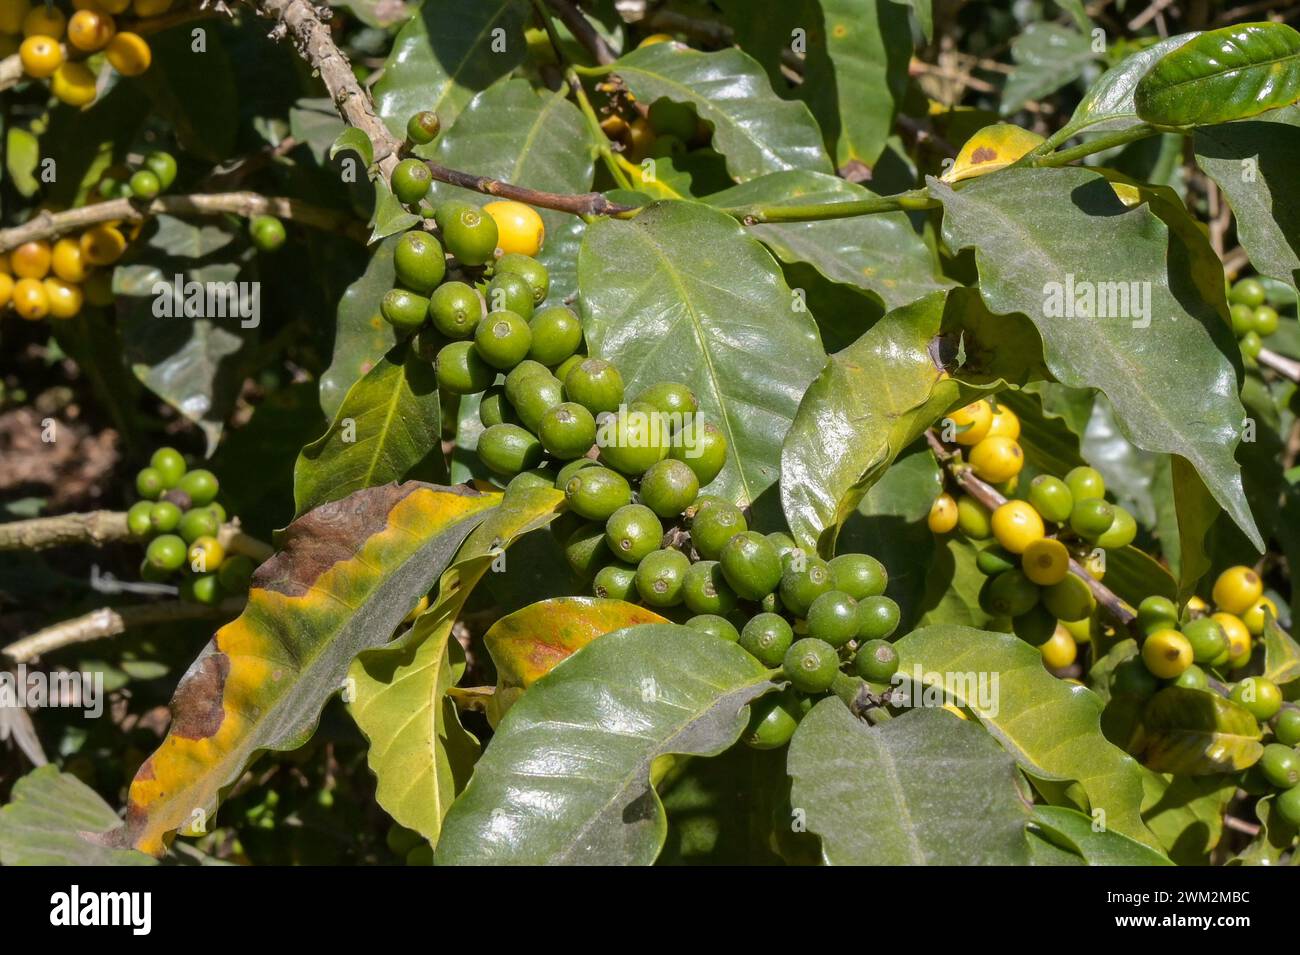 Green coffee beans ripening on a plant with ripe yellow beans on some branches Stock Photo